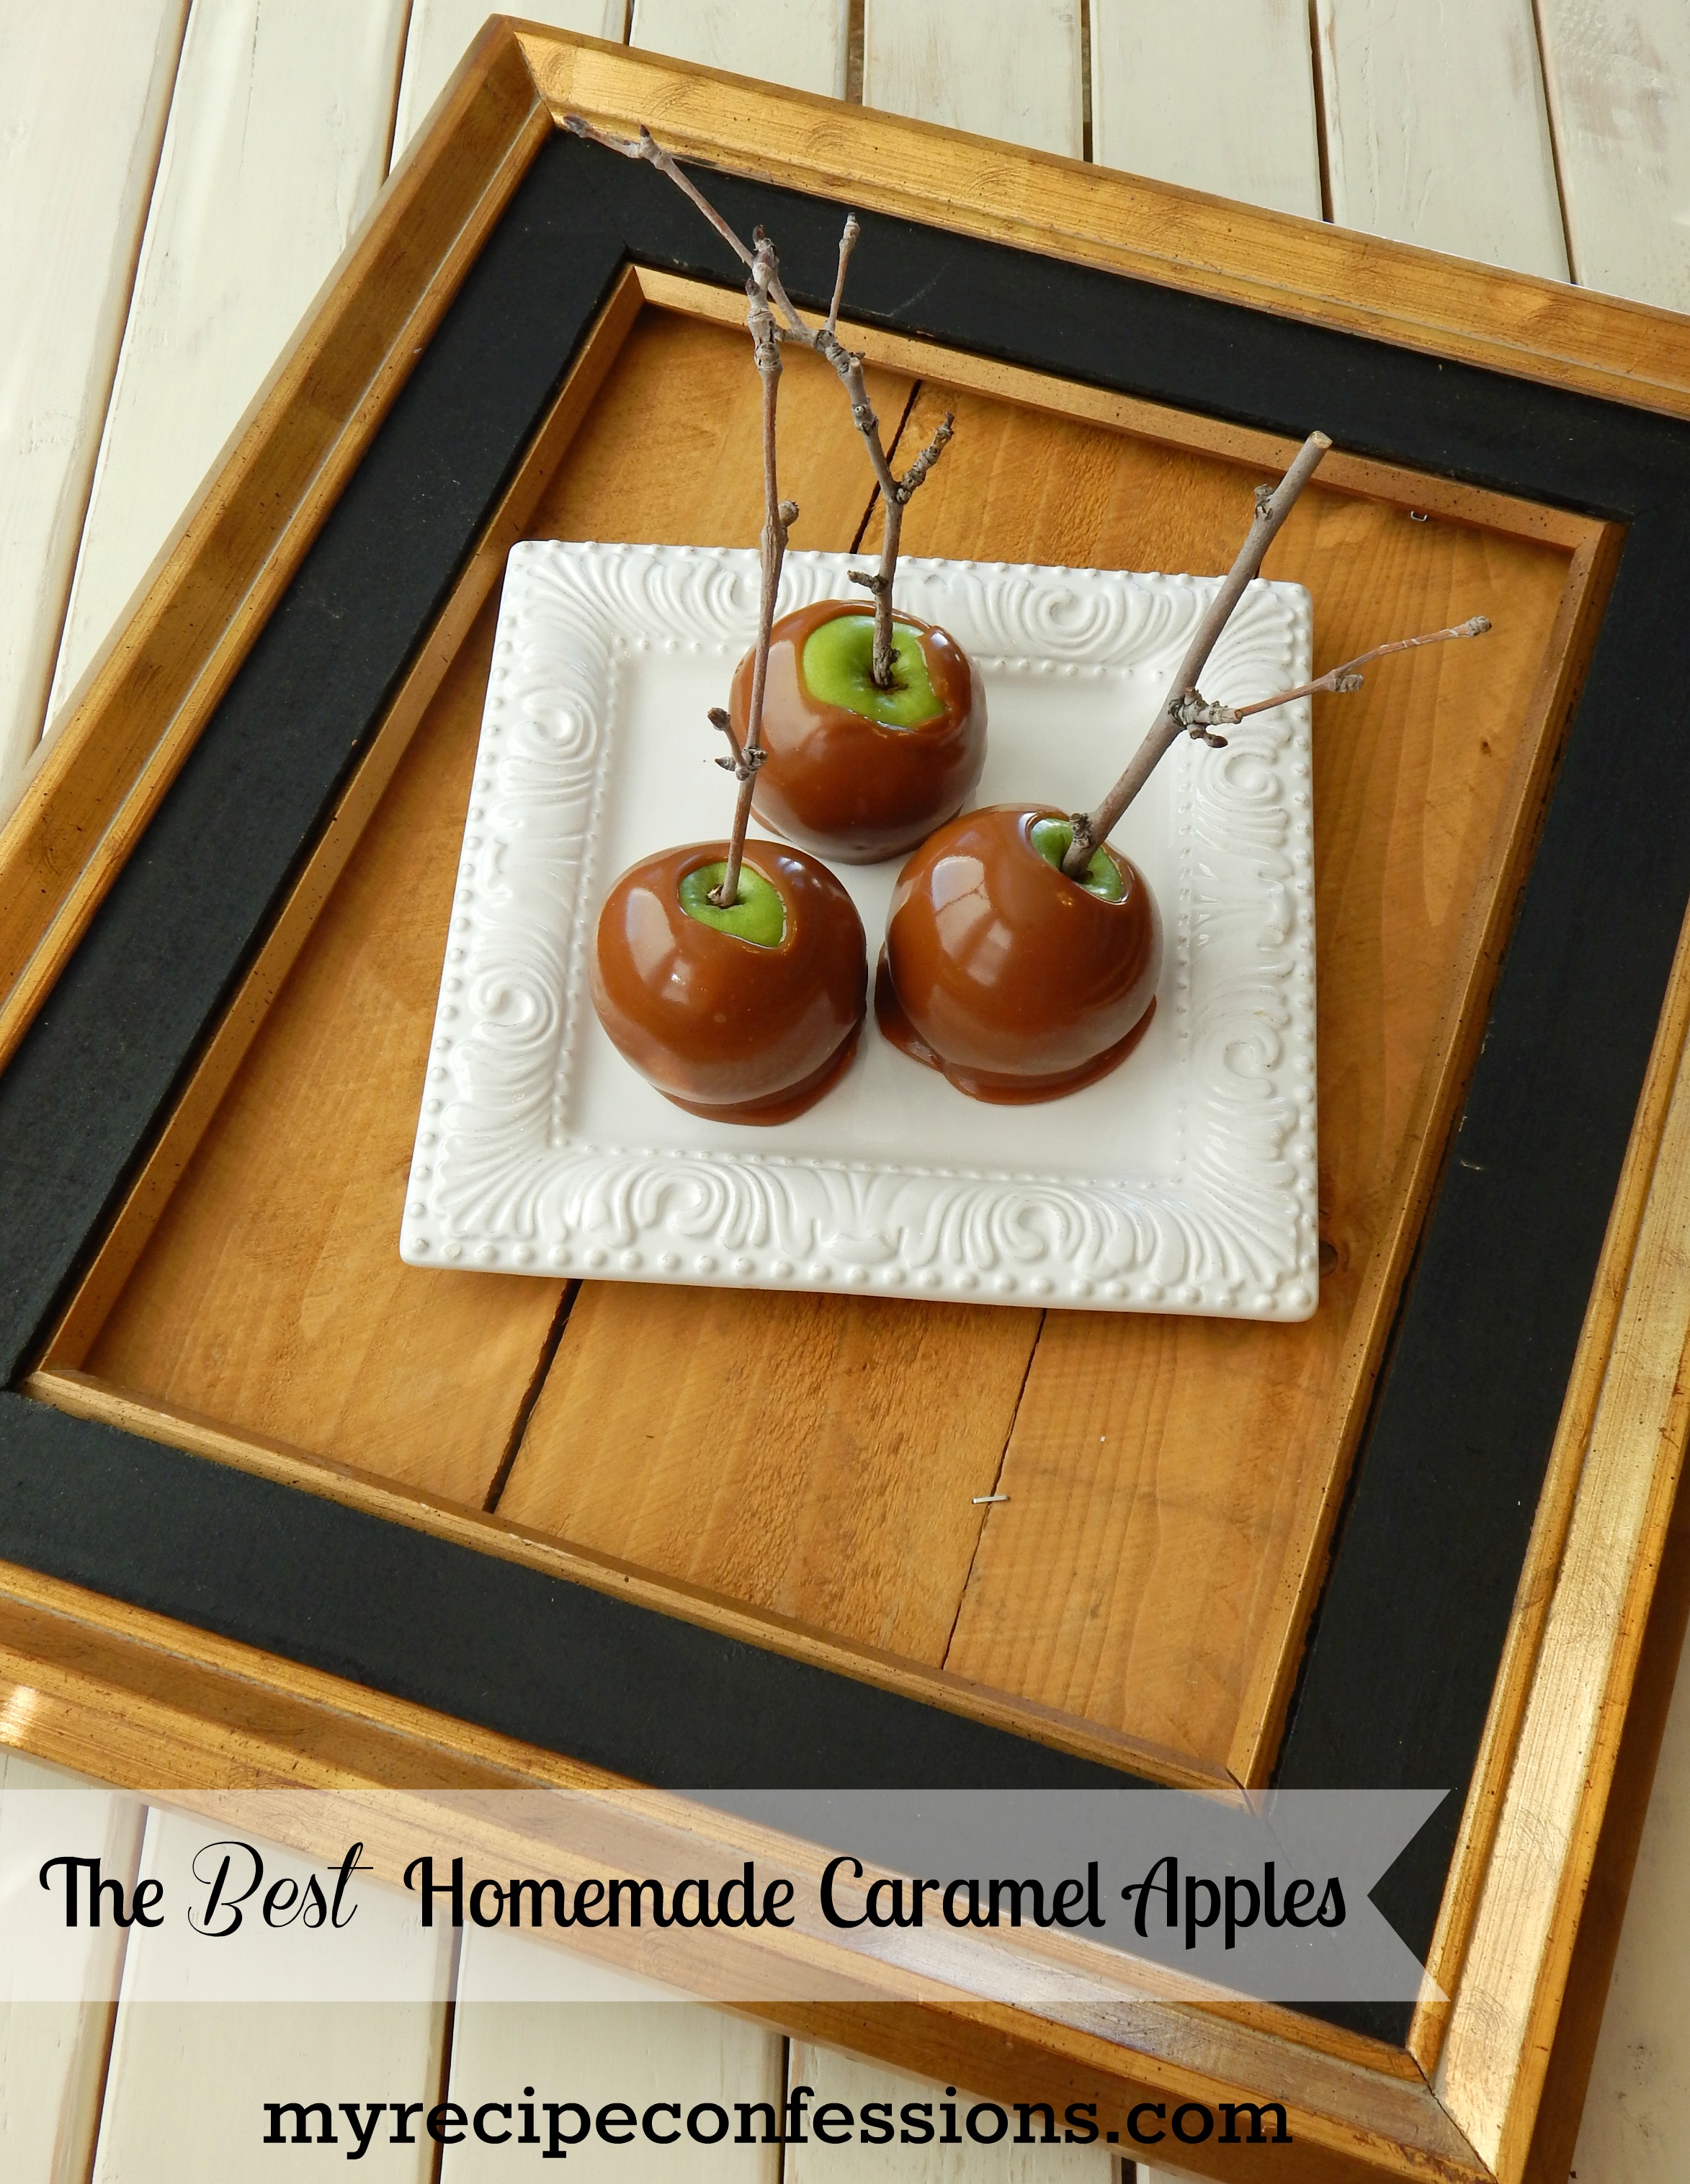 The Best Homemade Caramel Apples - My Recipe Confessions